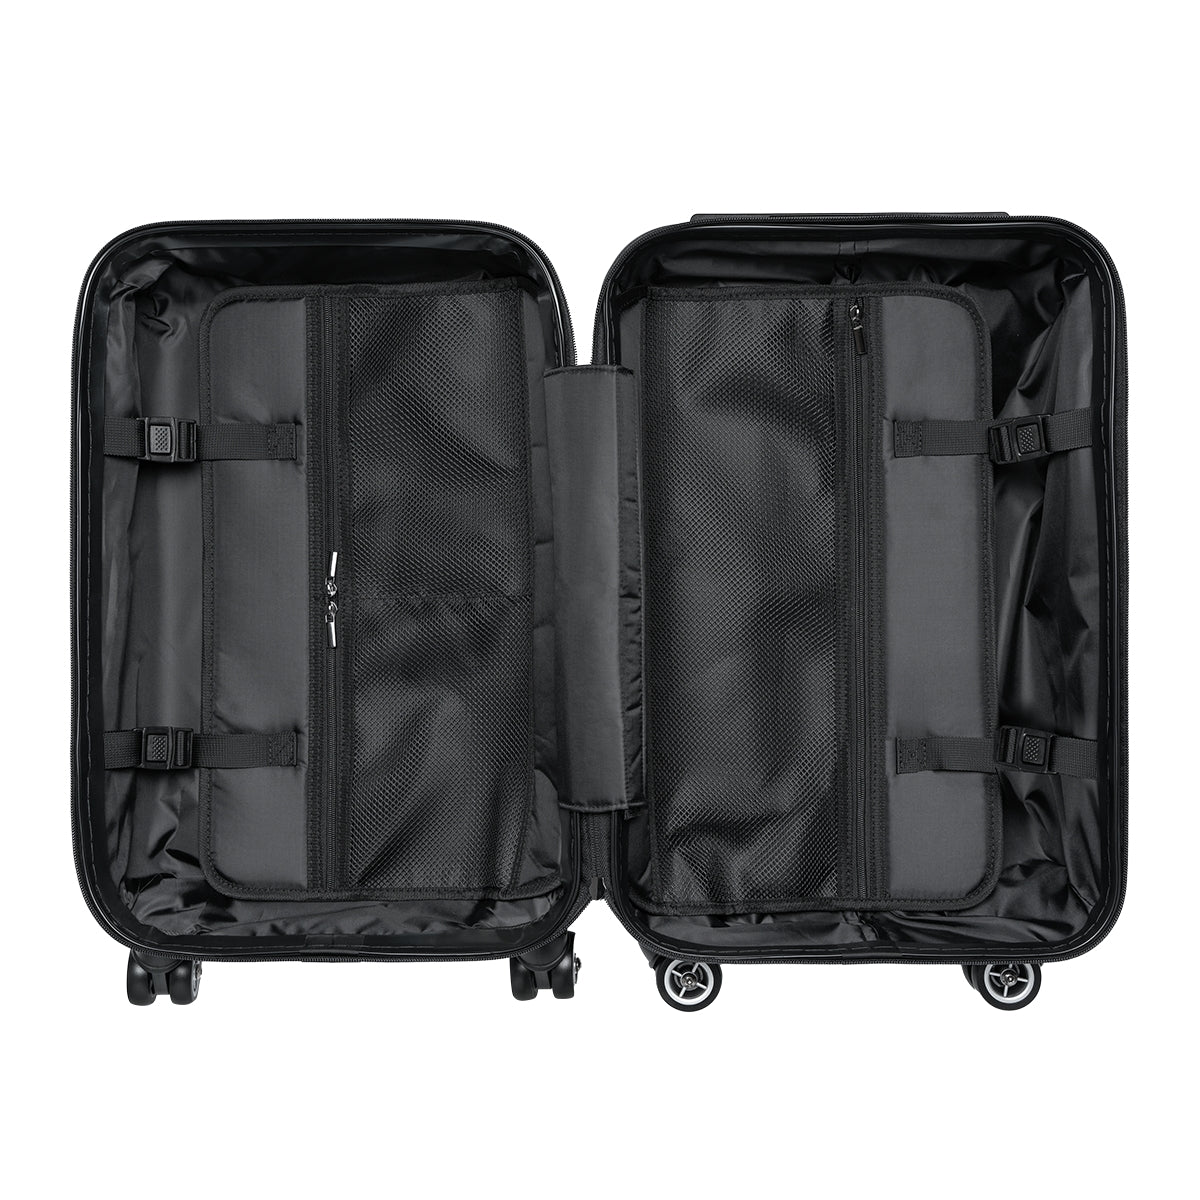 Getrott Drake If You’re Reading This It’s Too Late 2015 White Cabin Suitcase Extended Storage Adjustable Telescopic Handle Double wheeled Polycarbonate Hard-shell Built-in Lock-Bags-Geotrott